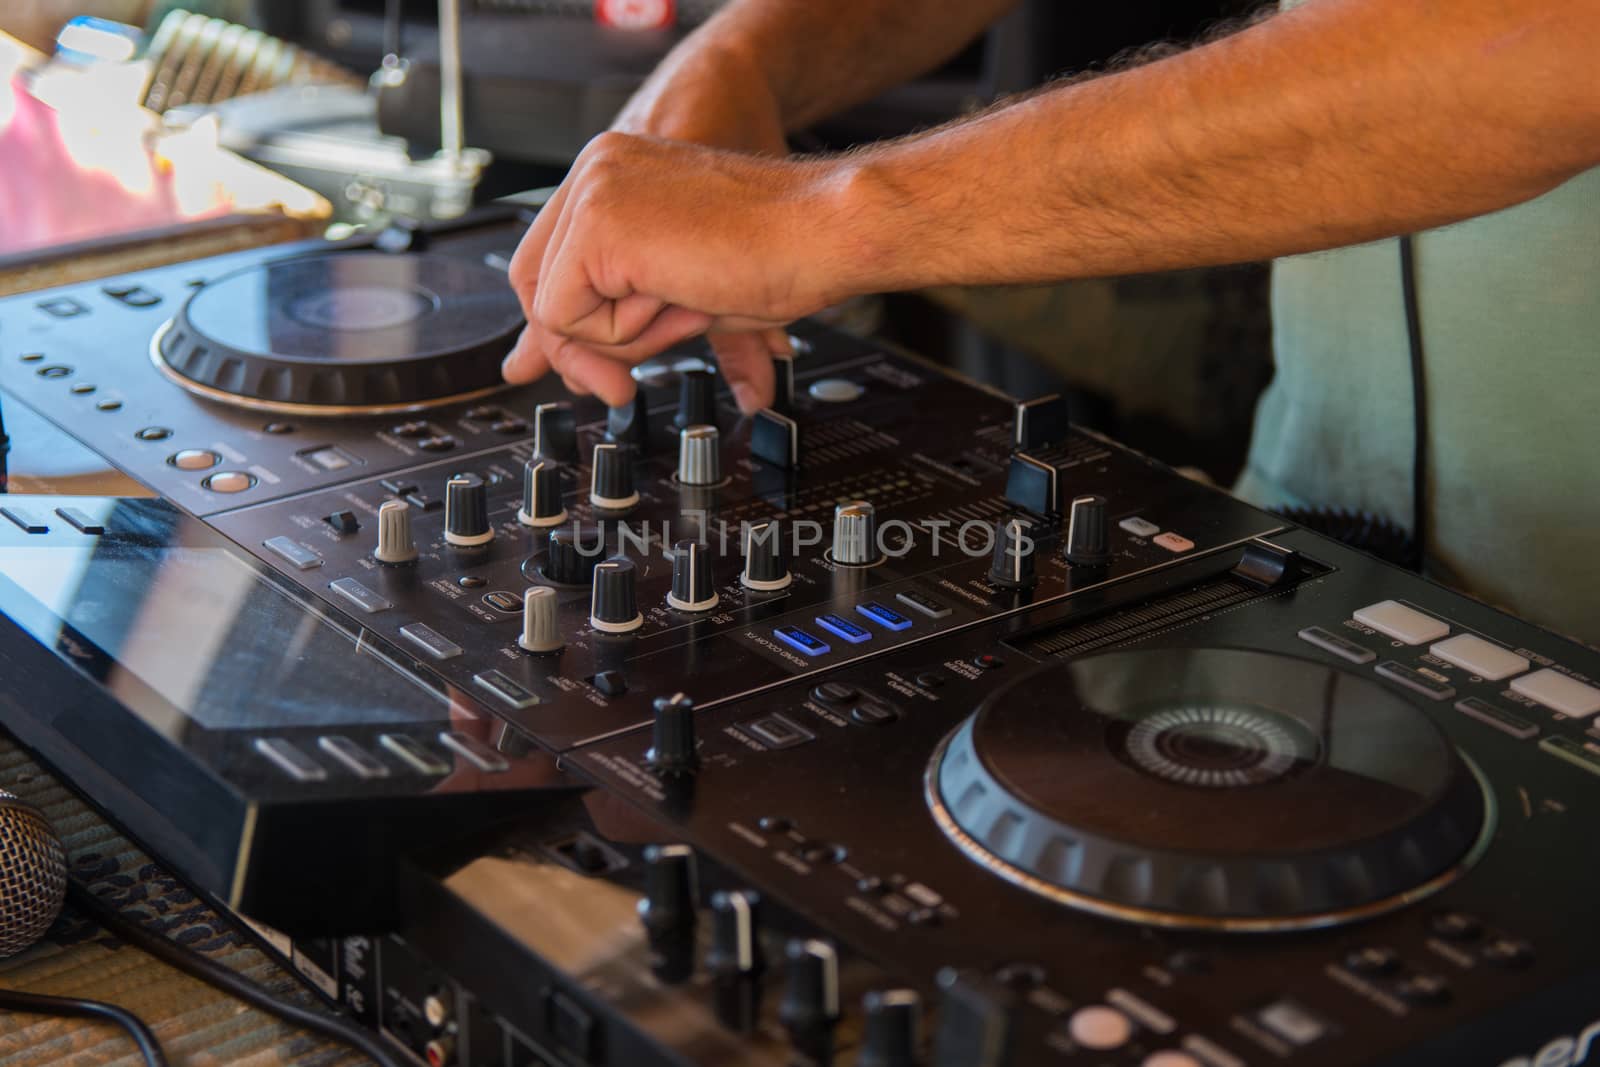 Party Dj play music at hip hop party.Turntable vinyl record player,analog audio equipment for disc jockey to scratch vinyl records,mix tracks.DJ scratching record,cut with cross fader.Dj party in club